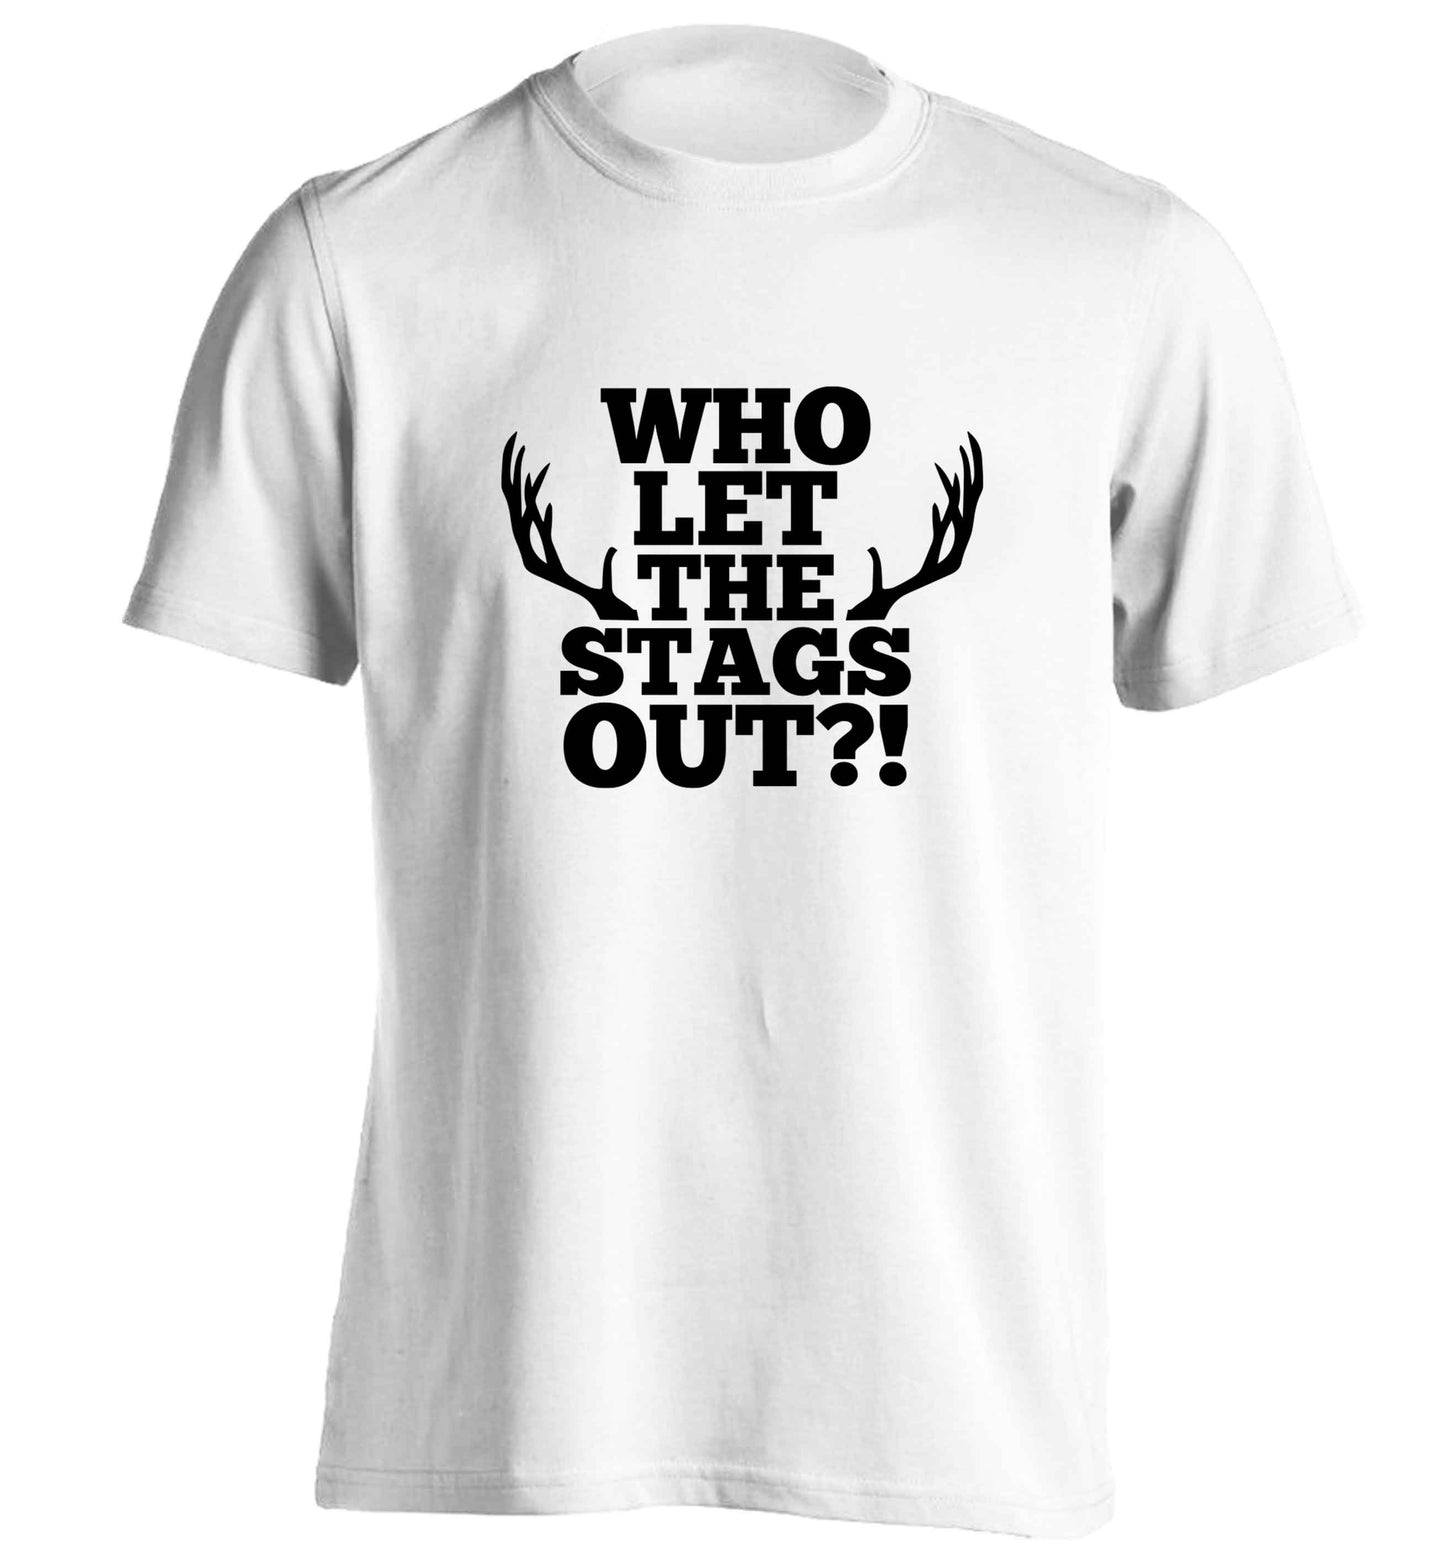 Who let the stags out adults unisex white Tshirt 2XL